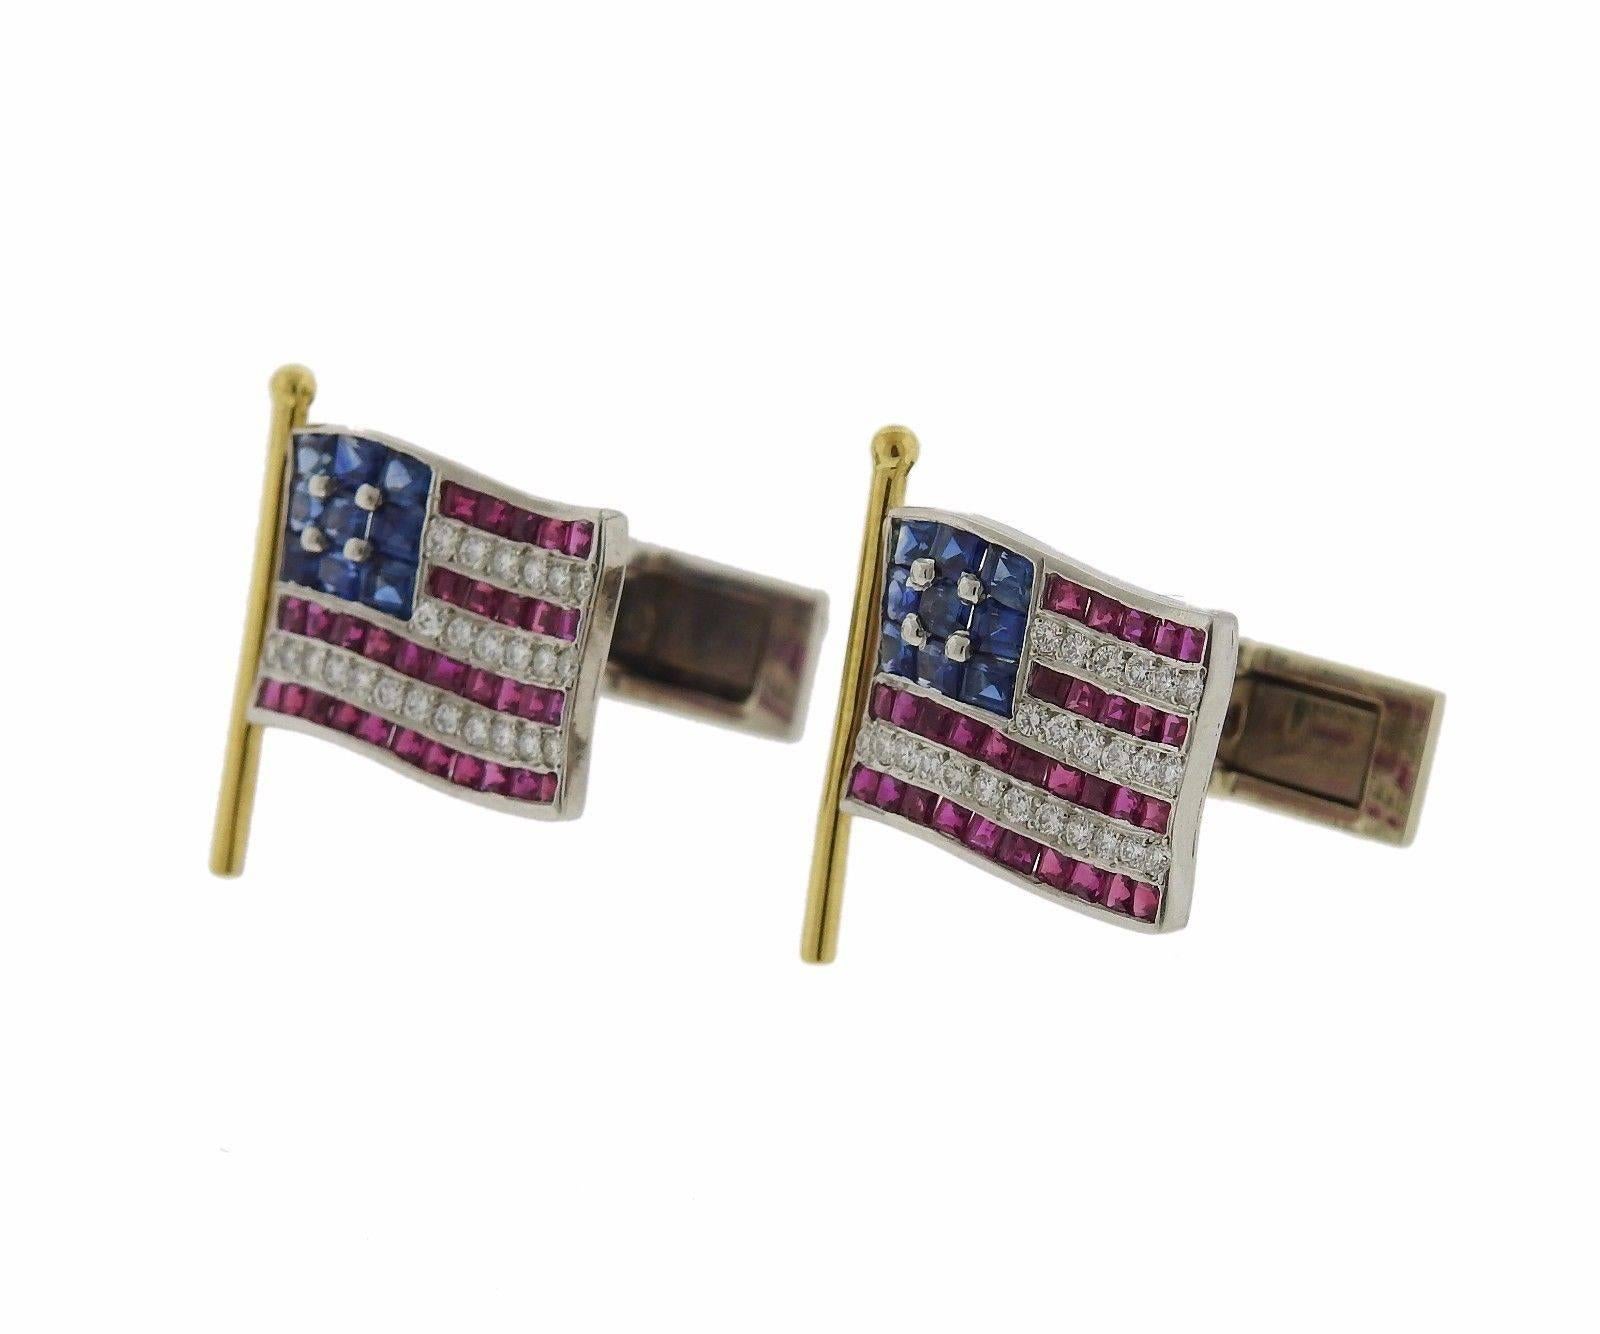 A pair of 18k gold and platinum cufflinks set with sapphires, rubies and approximately 0.40ctw of H/VS-SI diamonds.  The cufflinks measure 21mm x 17mm and weigh 13.4 grams.  Marked: 18k , tested plat.